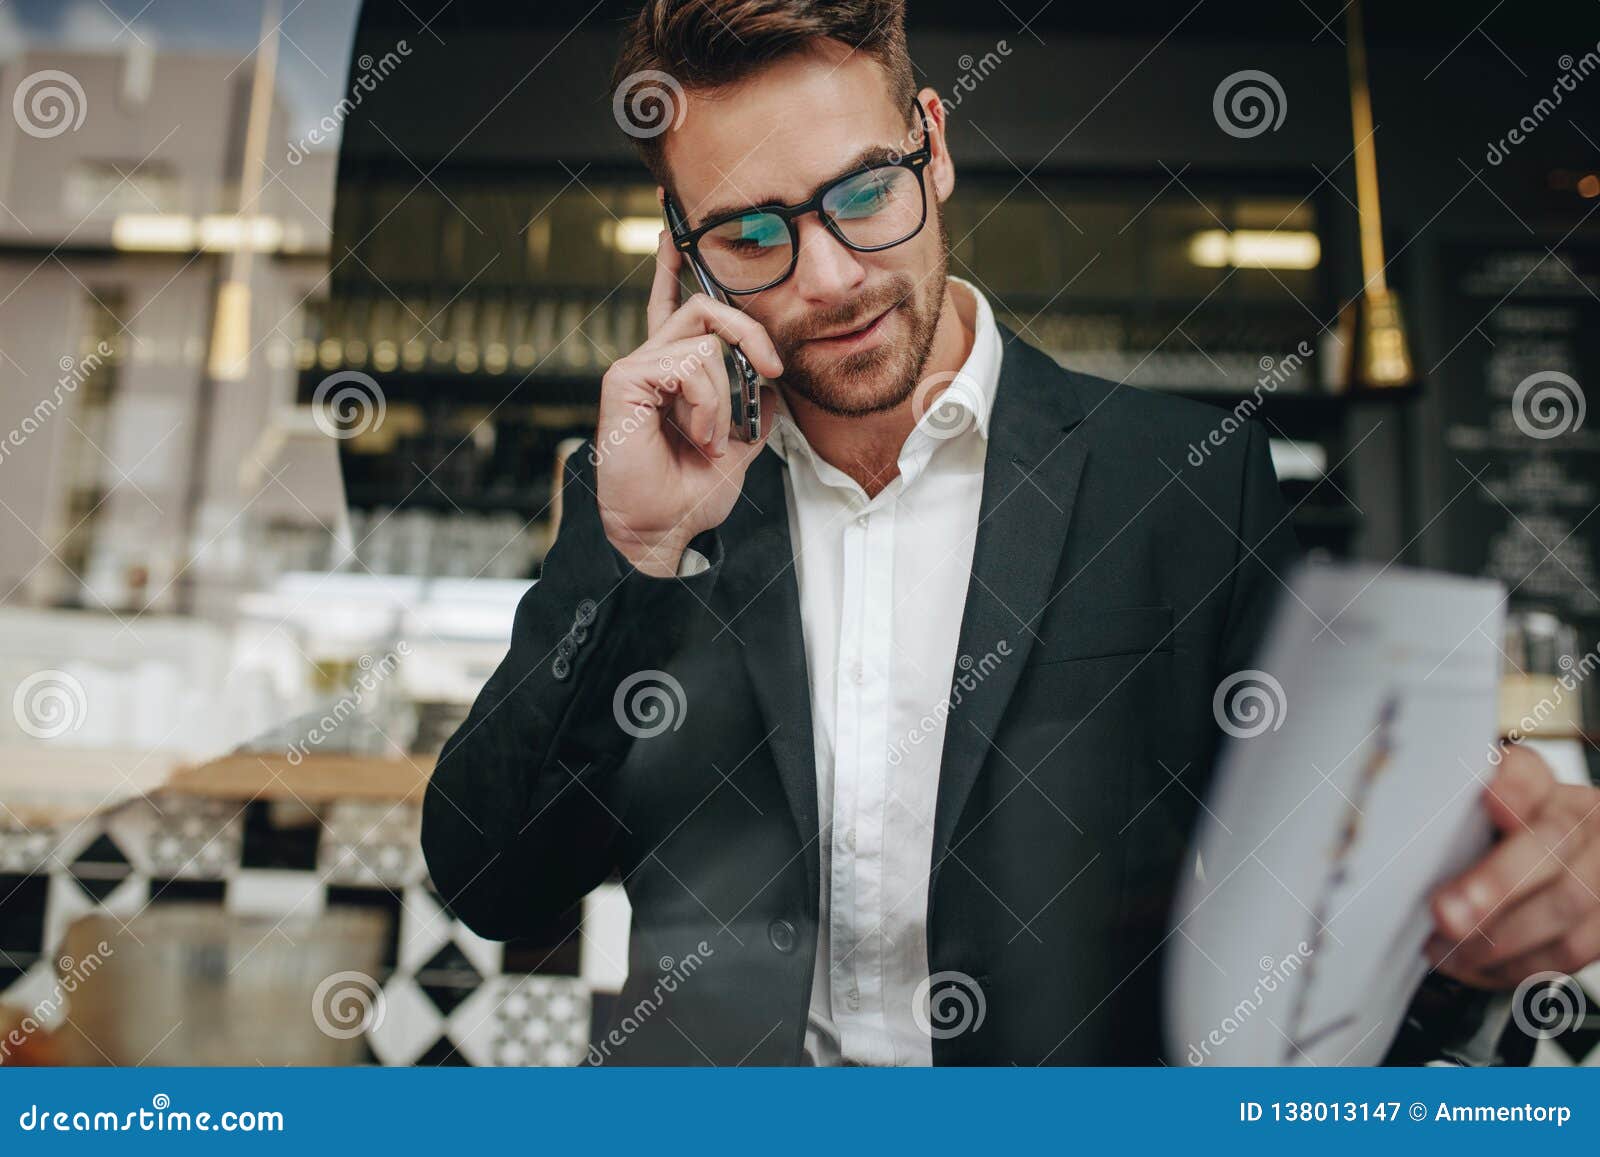  Entrepreneur  Talking On Cell Phone  Looking At Office 